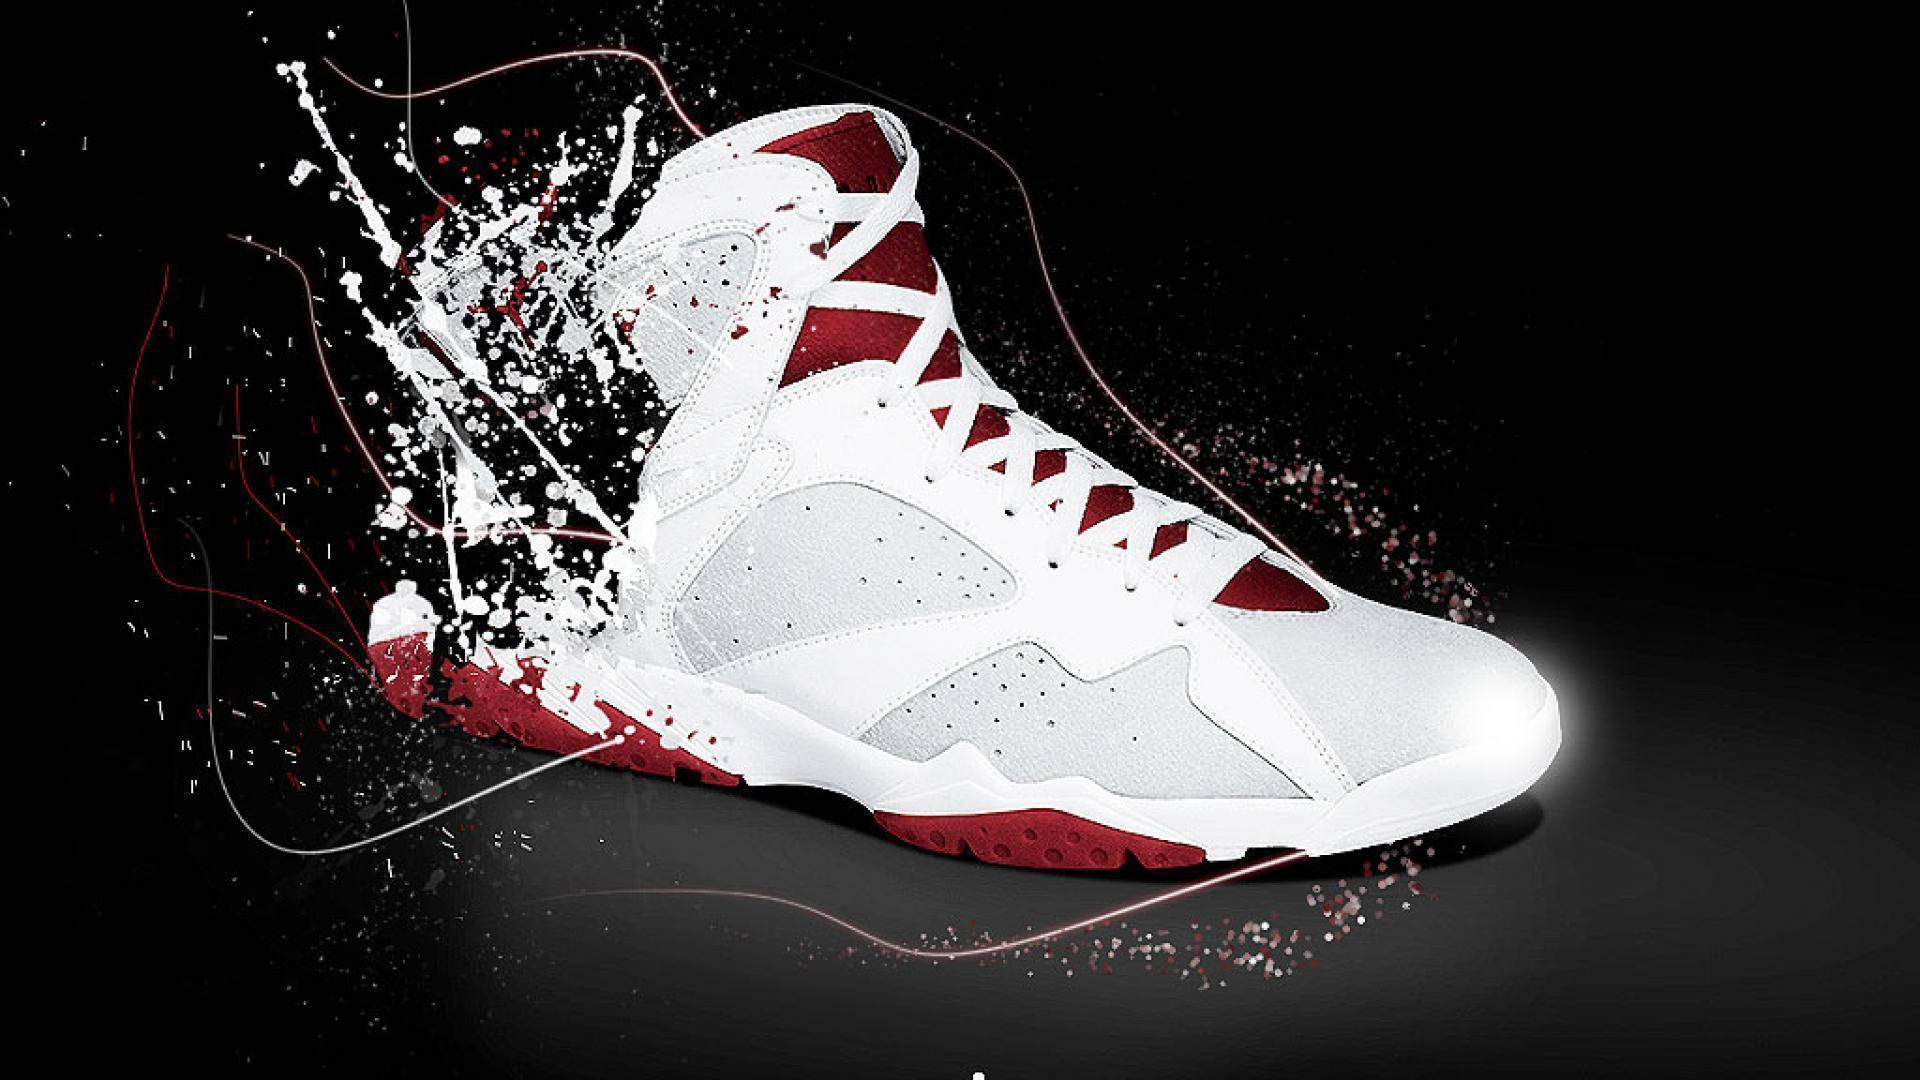 Caption: Classic Red And White Jordan 7 Basketball Shoes